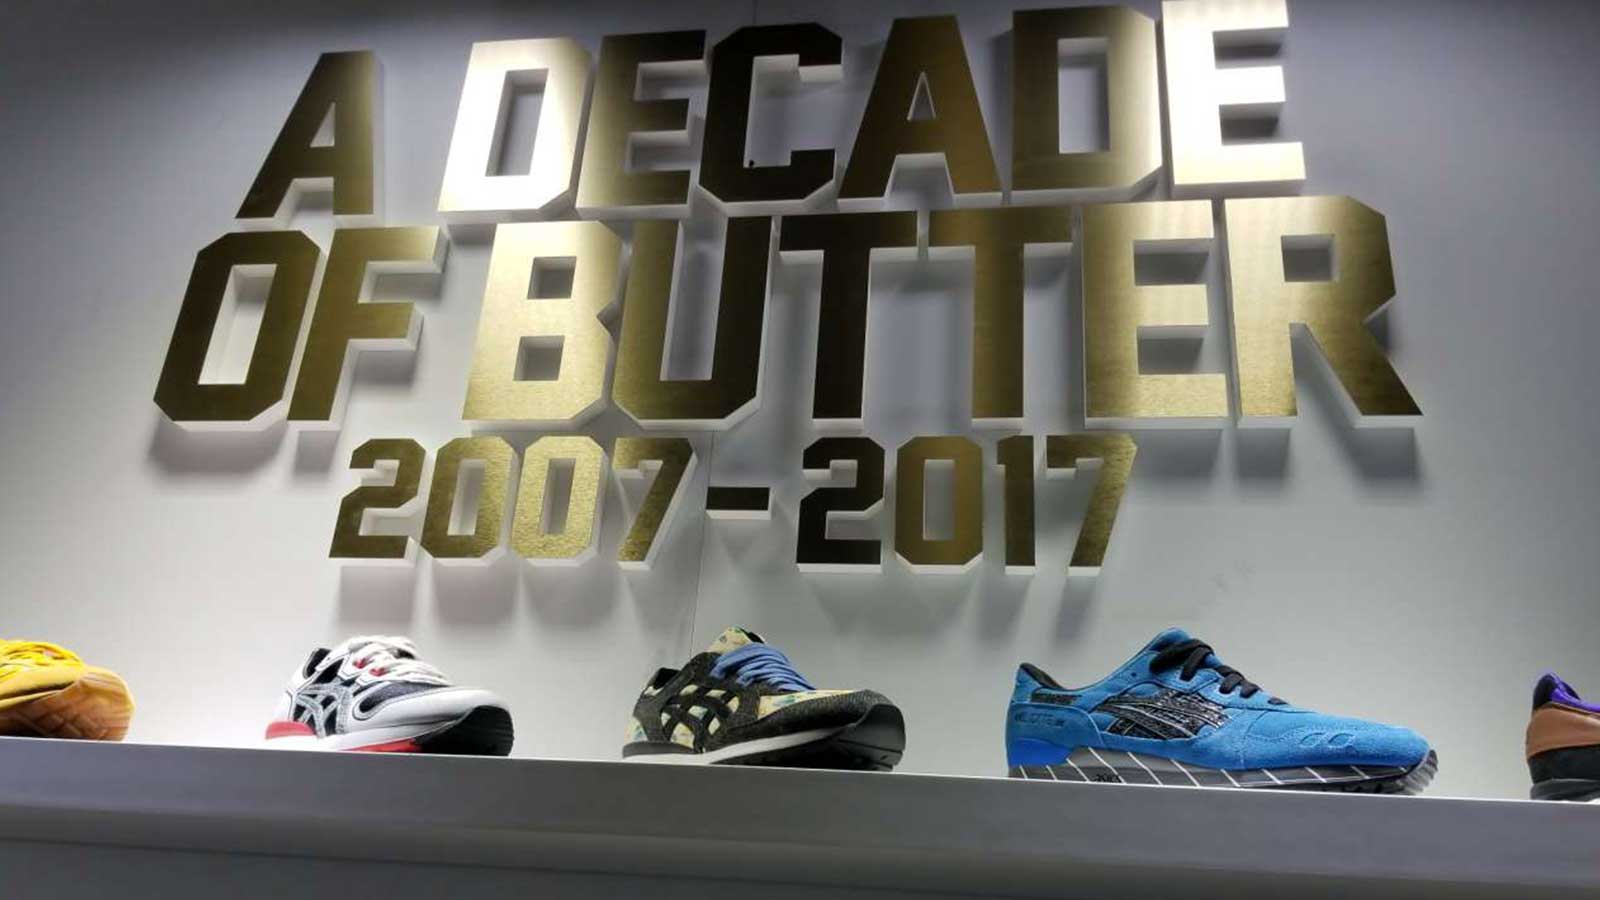 a decade of butter ultraboard signs